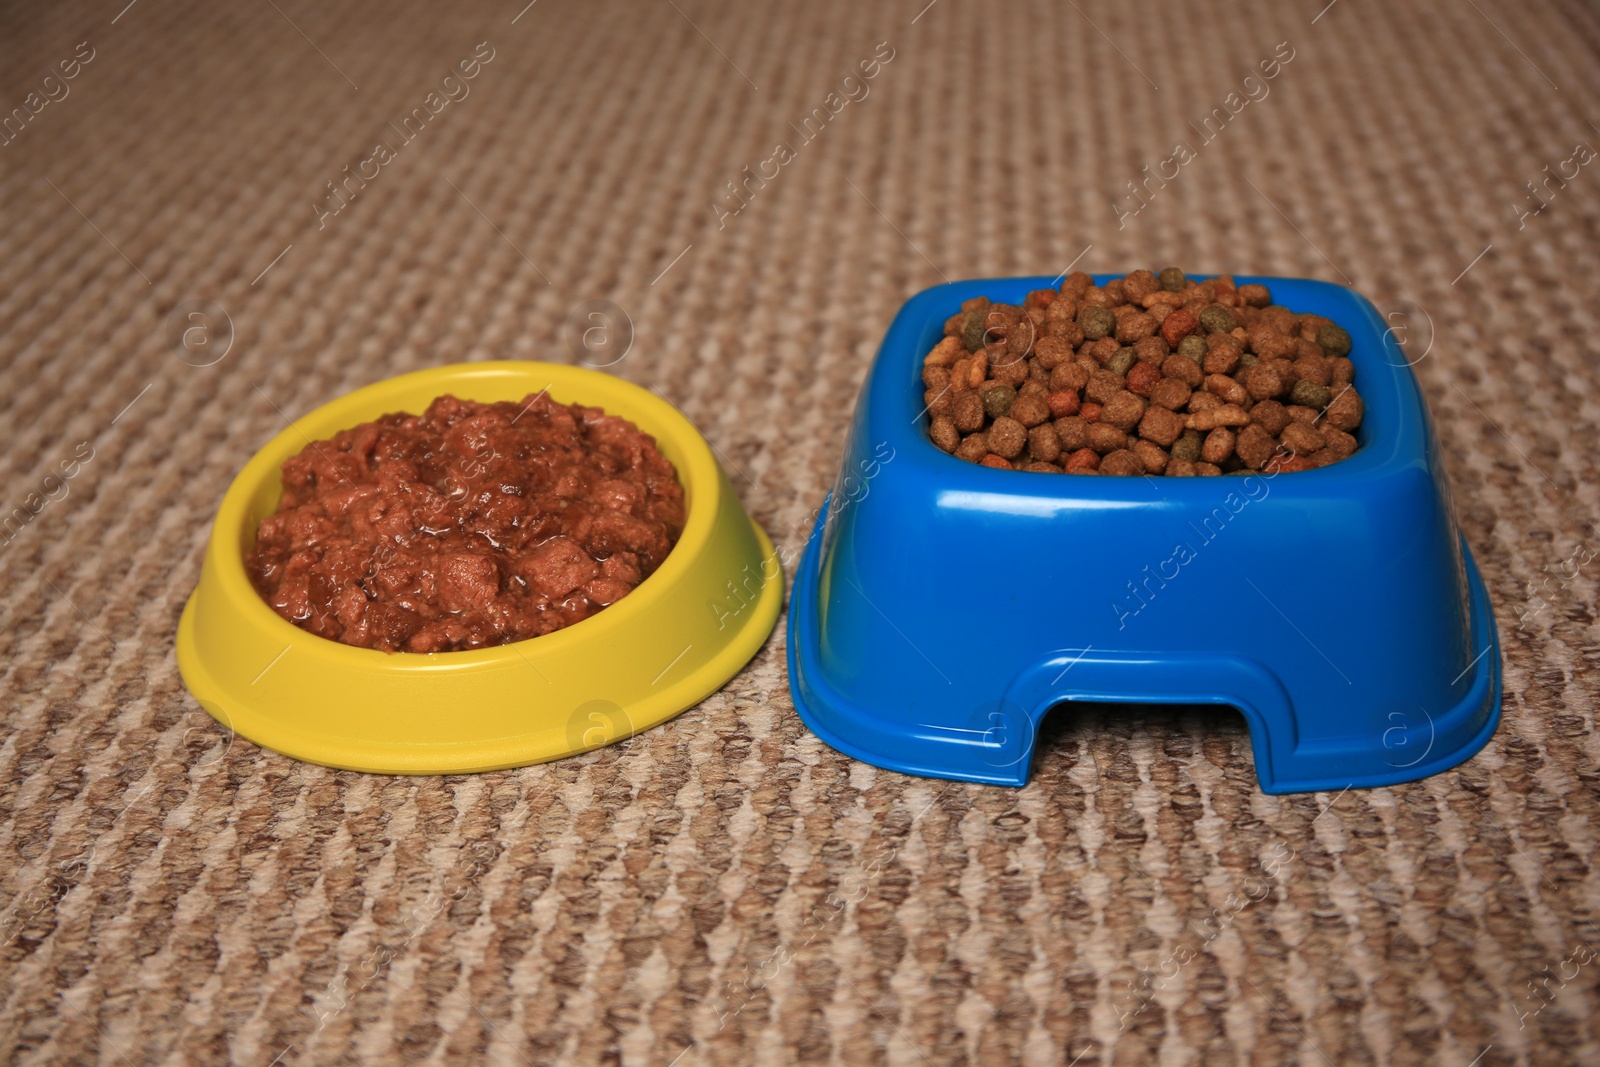 Photo of Dry and wet pet food in feeding bowls on soft carpet